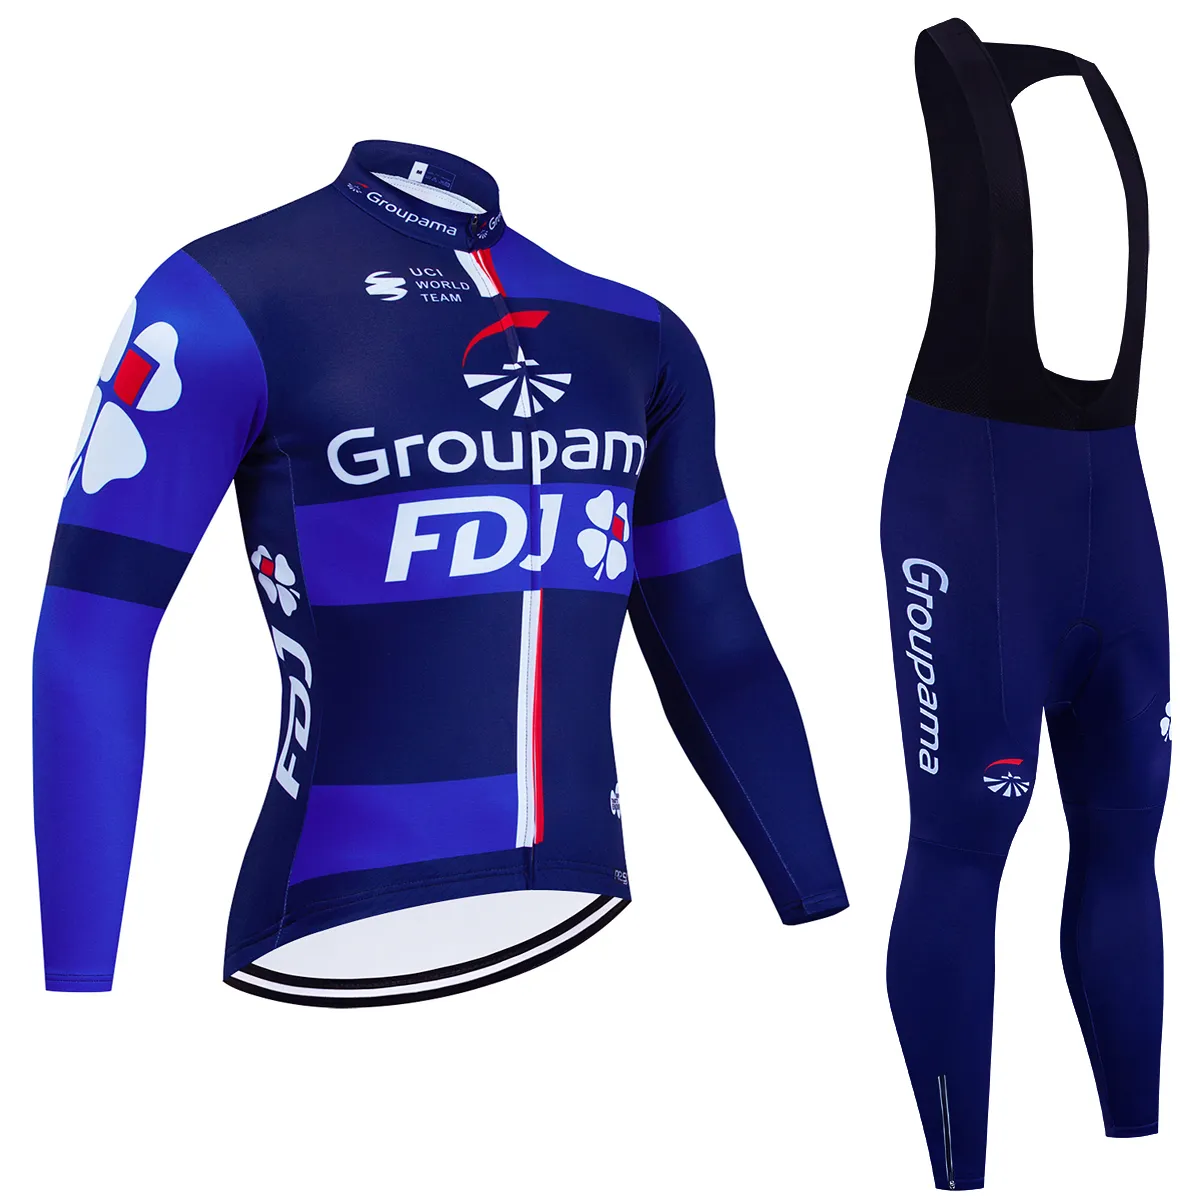 2024 QUICK STEP Team long sleeve Cycling jersey maillot ciclismo